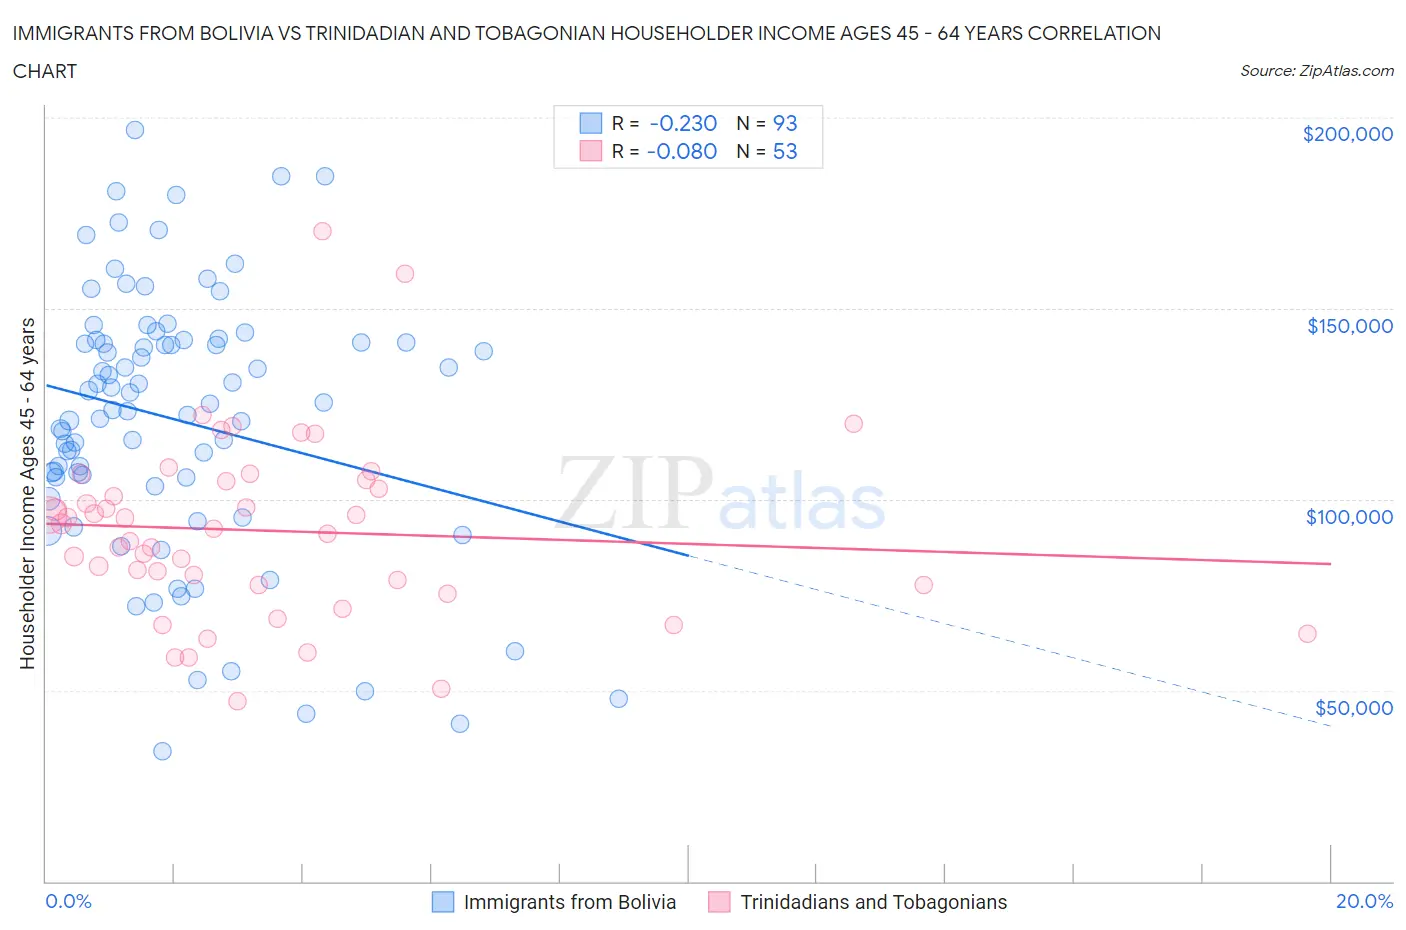 Immigrants from Bolivia vs Trinidadian and Tobagonian Householder Income Ages 45 - 64 years